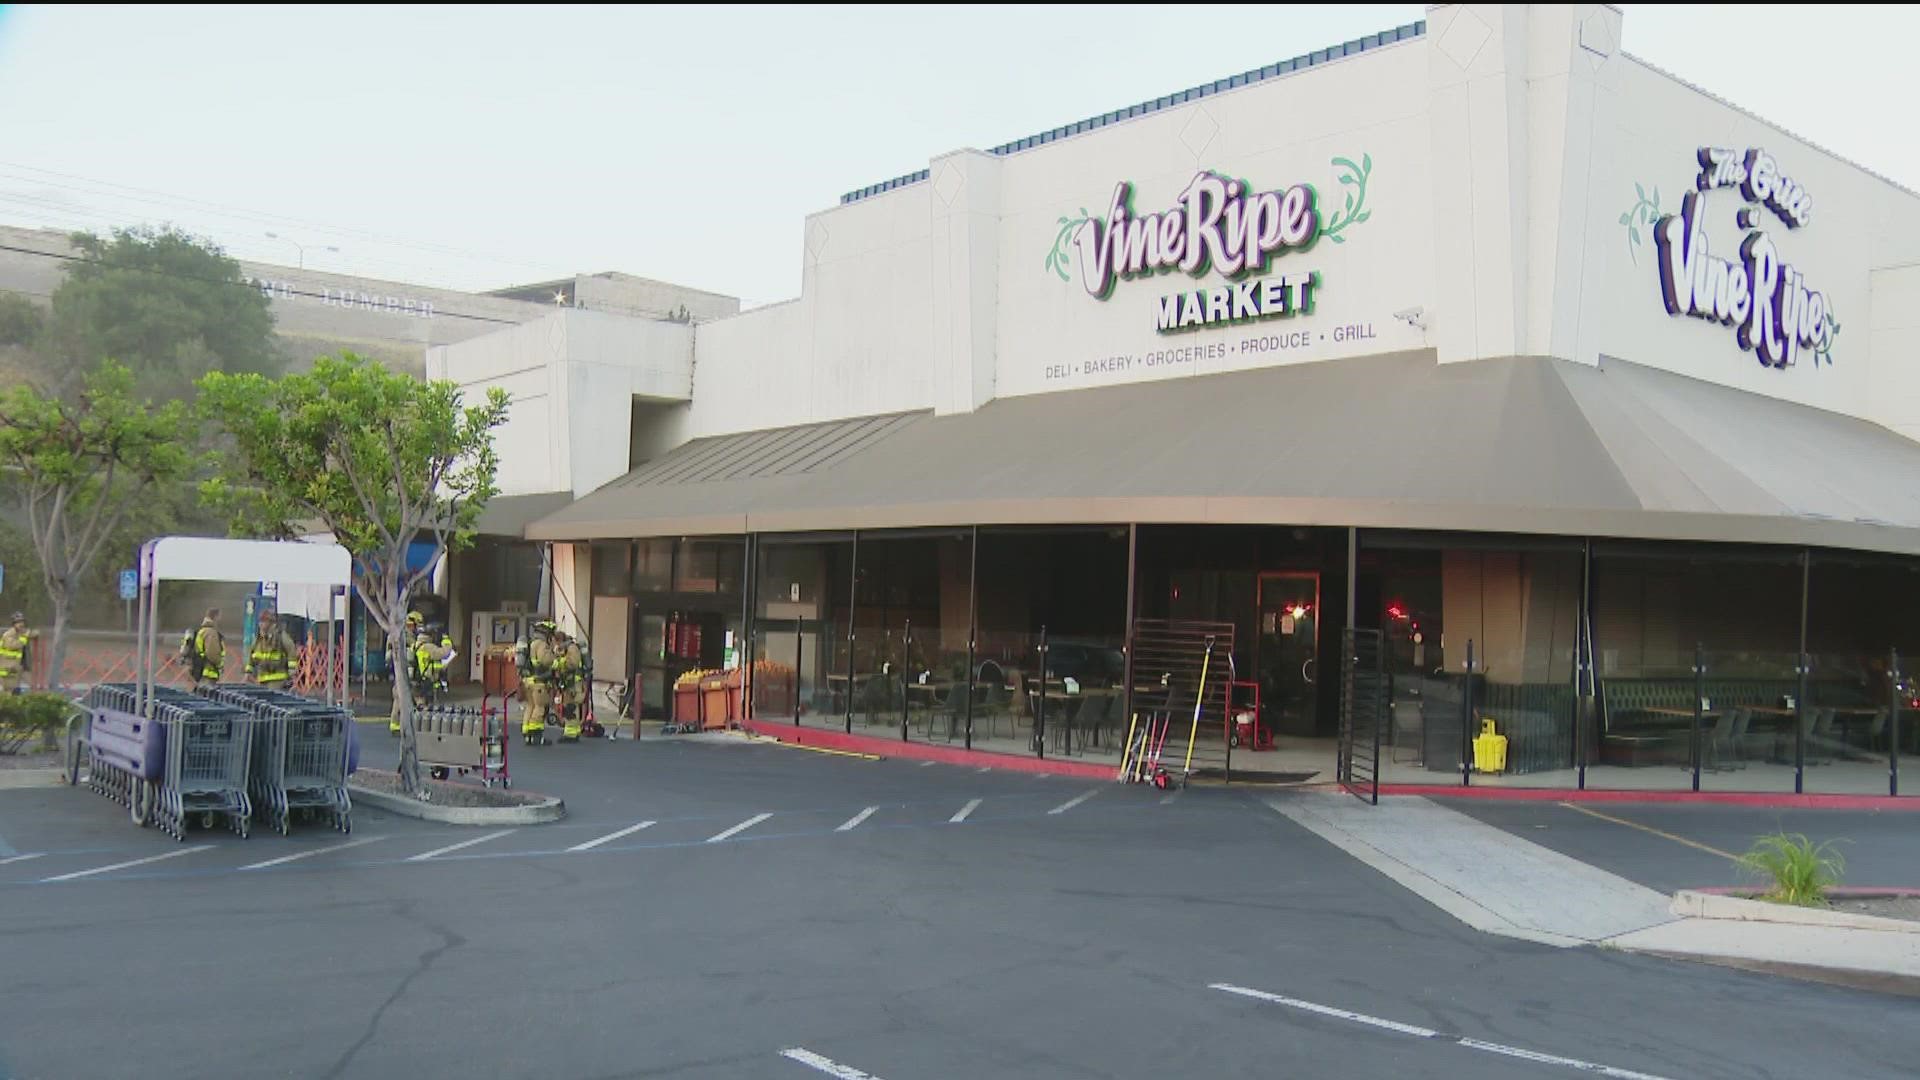 The second alarm fire broke out at the Vine Ripe Market located in the 8100 block of Fletcher Pkwy around 5:15 a.m., according to the La Mesa Fire Department.